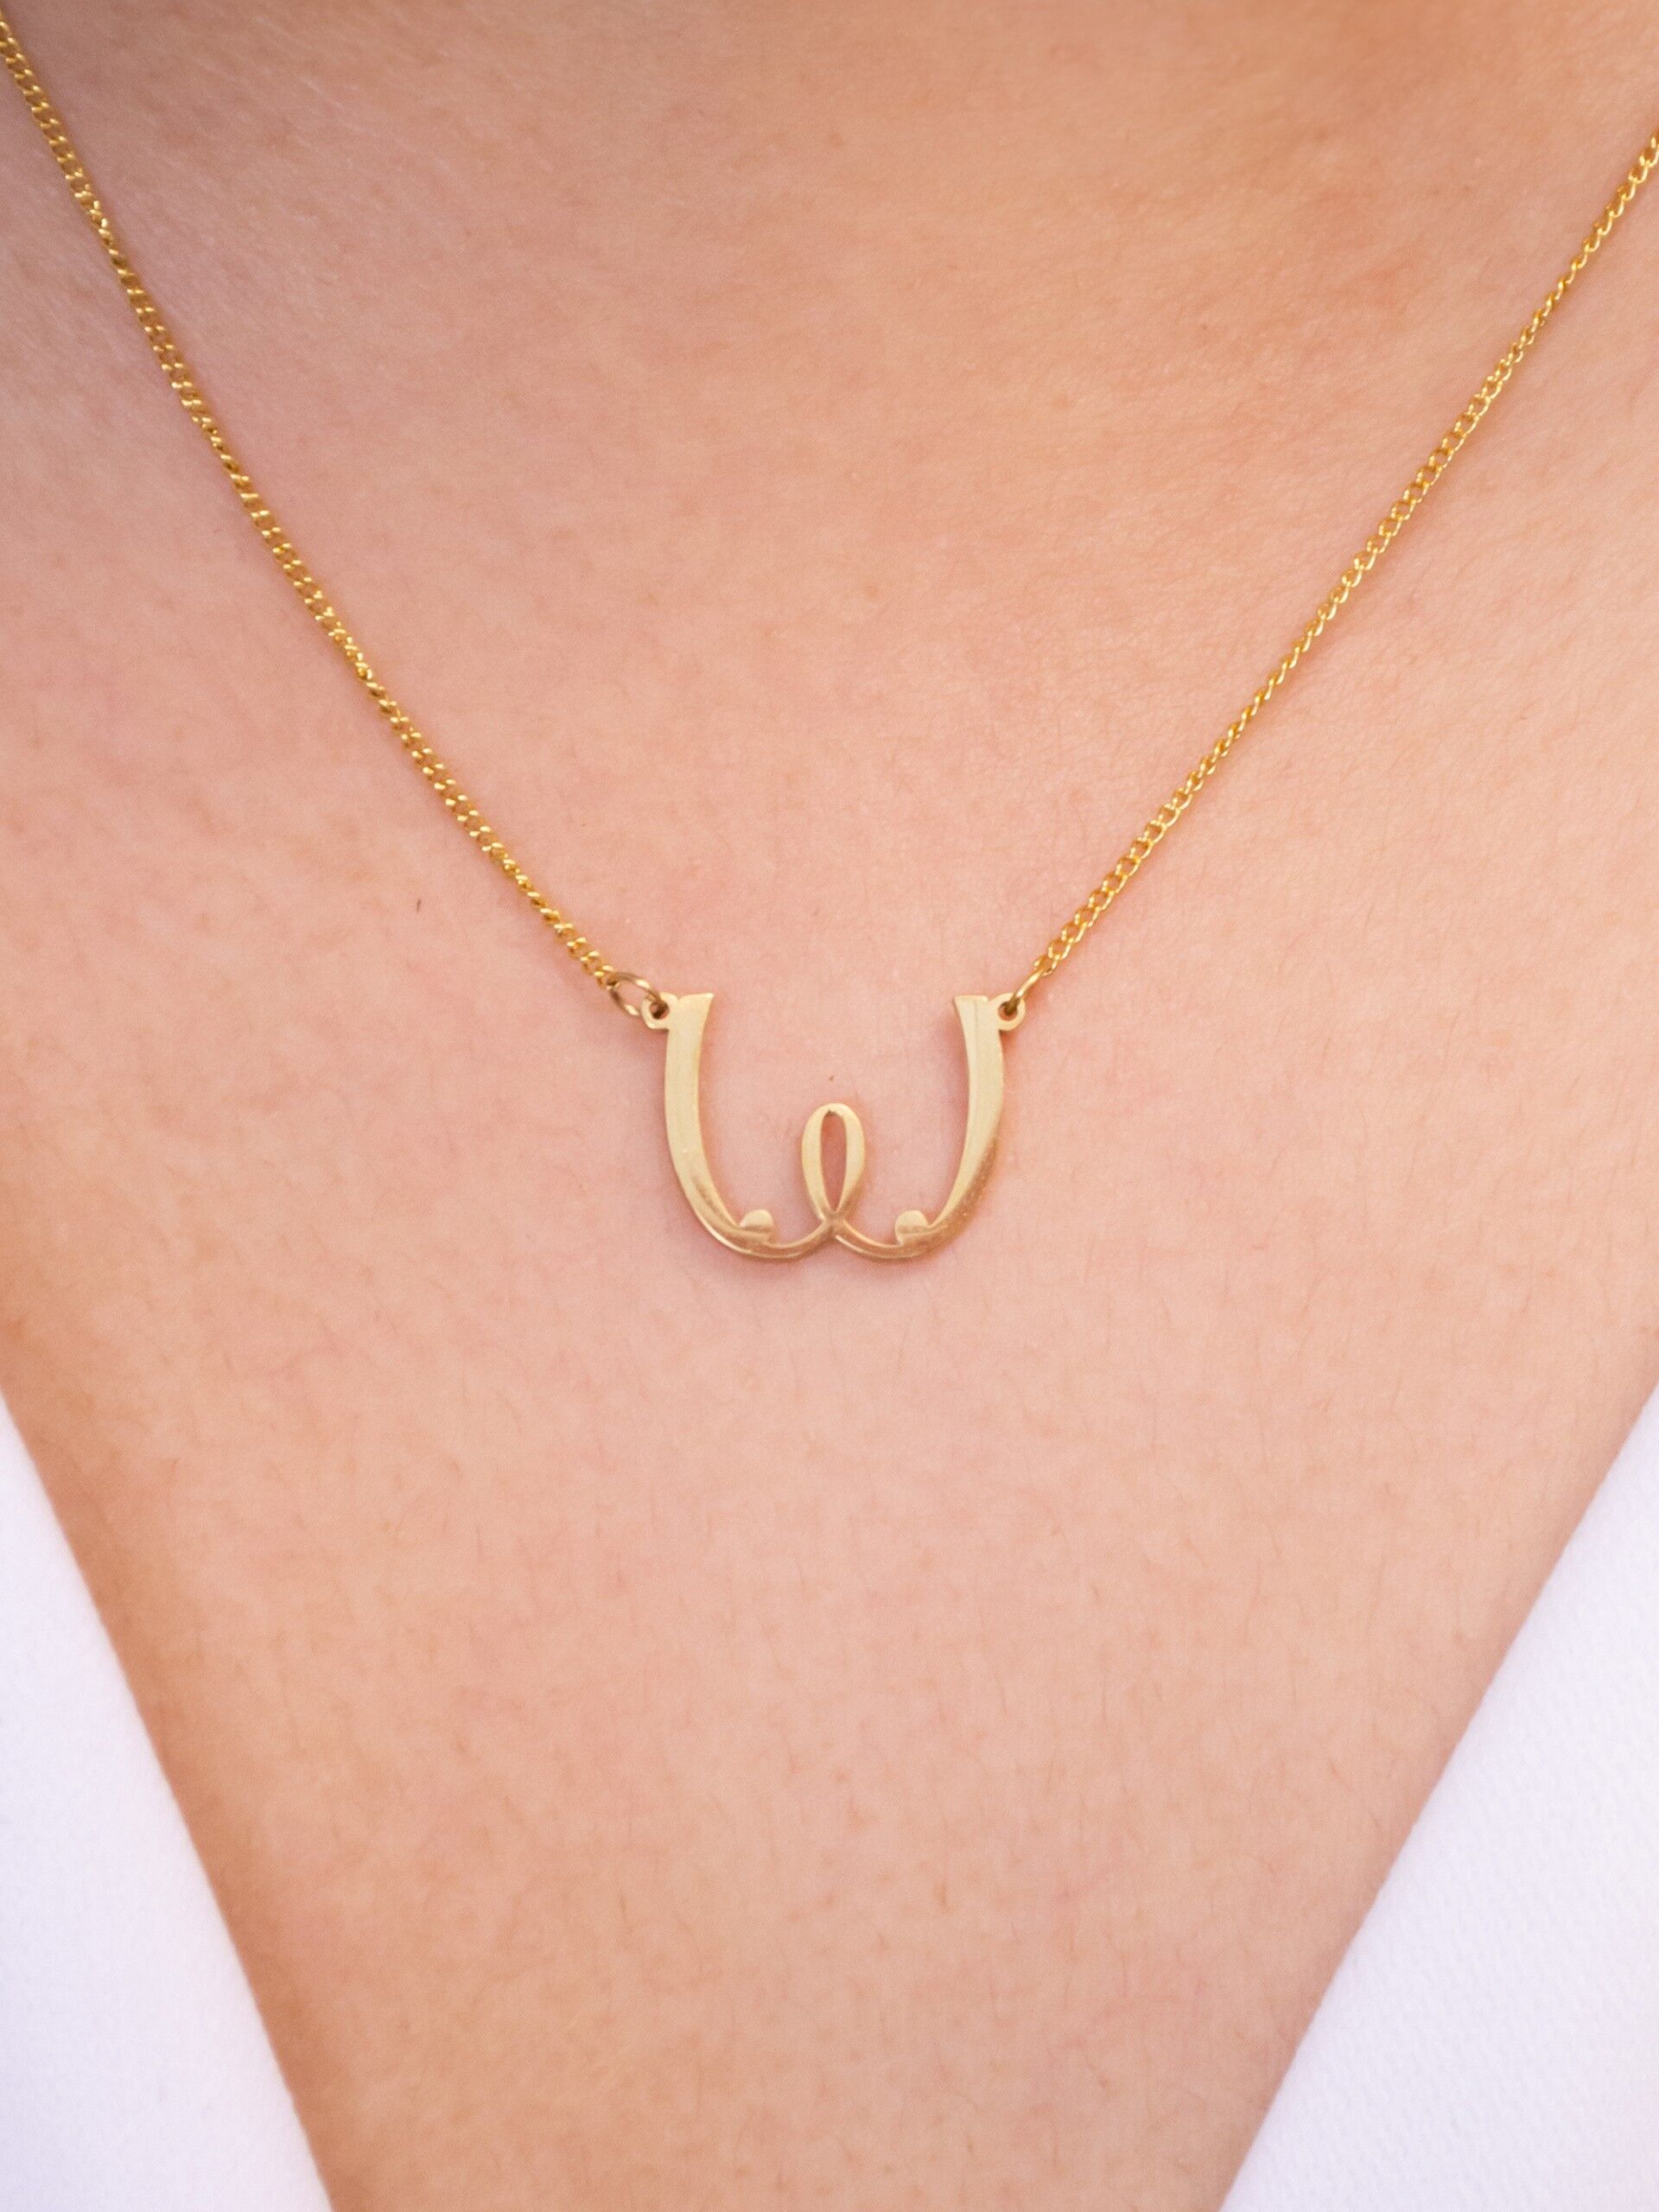 Womanizer Boob Necklace Supporting Breast Cancer Research